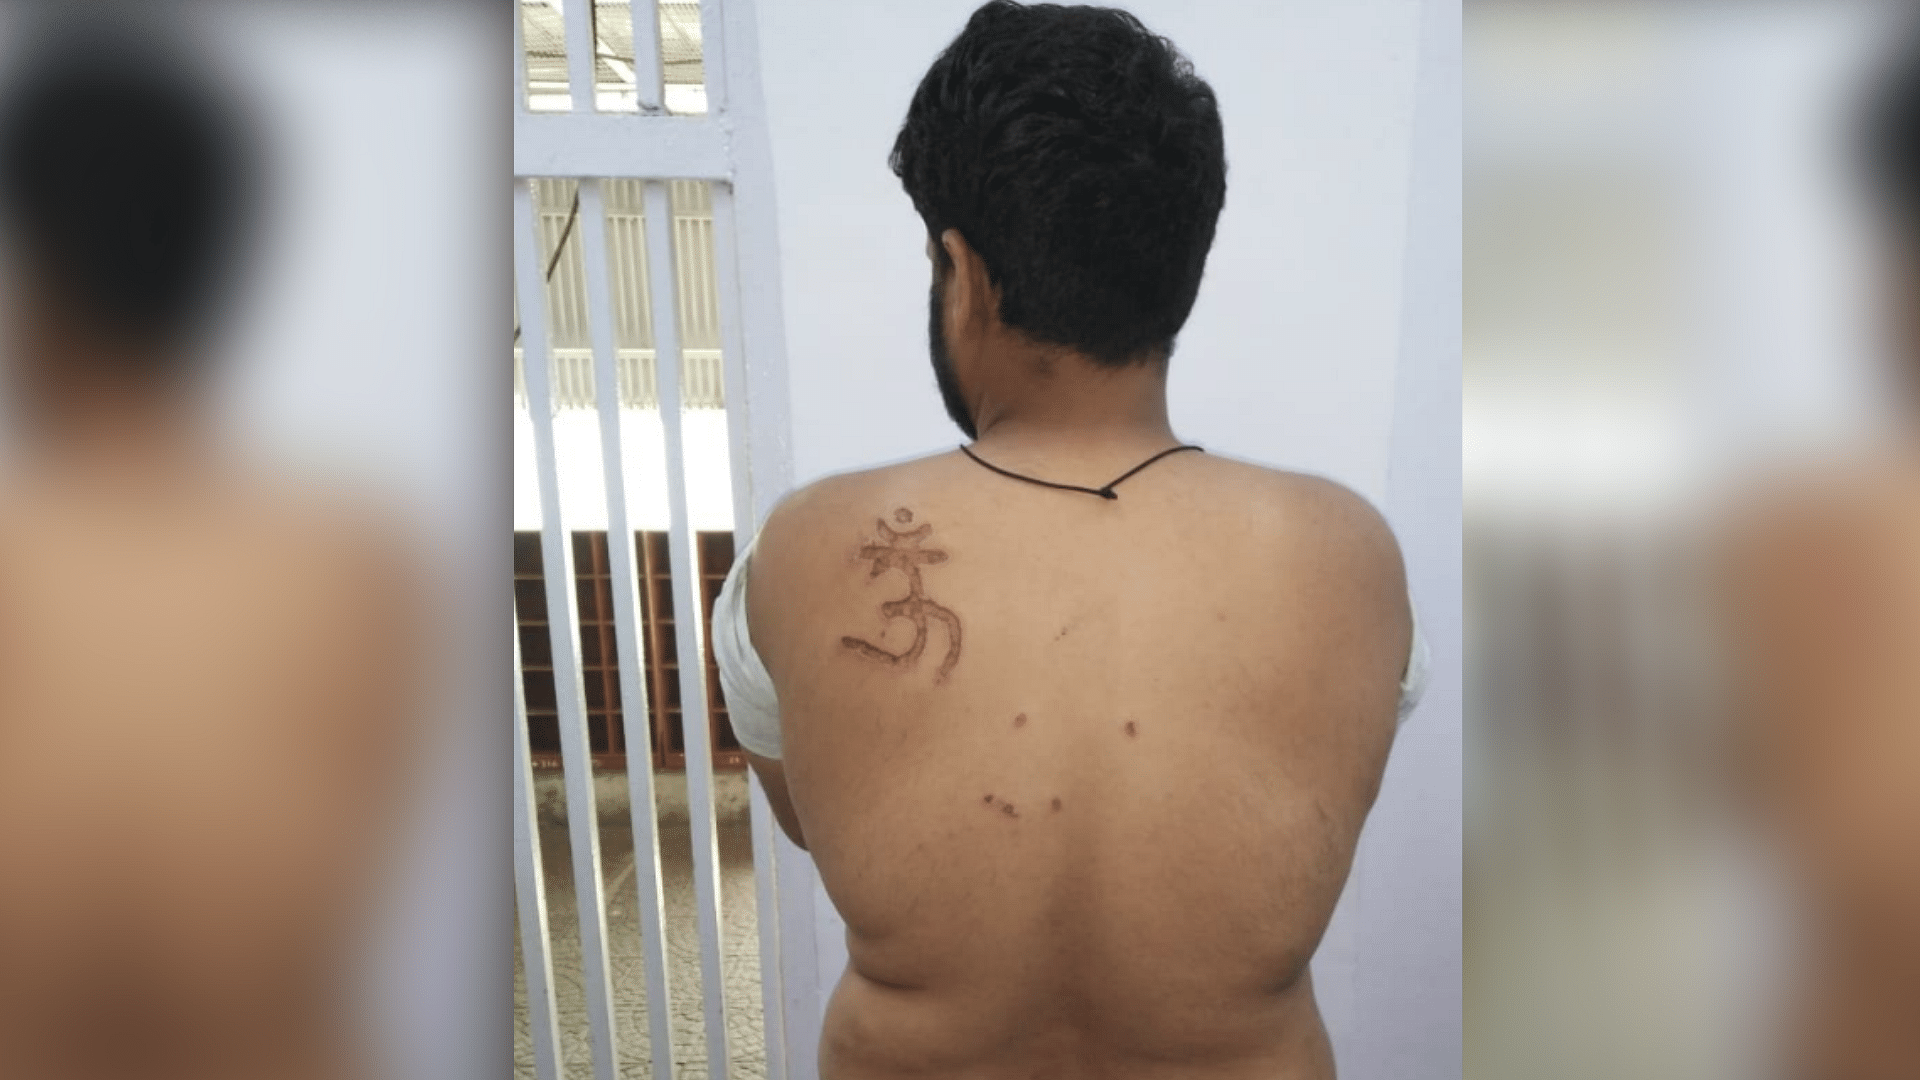 Tihar Prisoner, Nabbir has alleged that the jail Superintendent subjected him to inhuman treatment, deprived him of food and branded the ‘Om’ symbol on his shoulder.